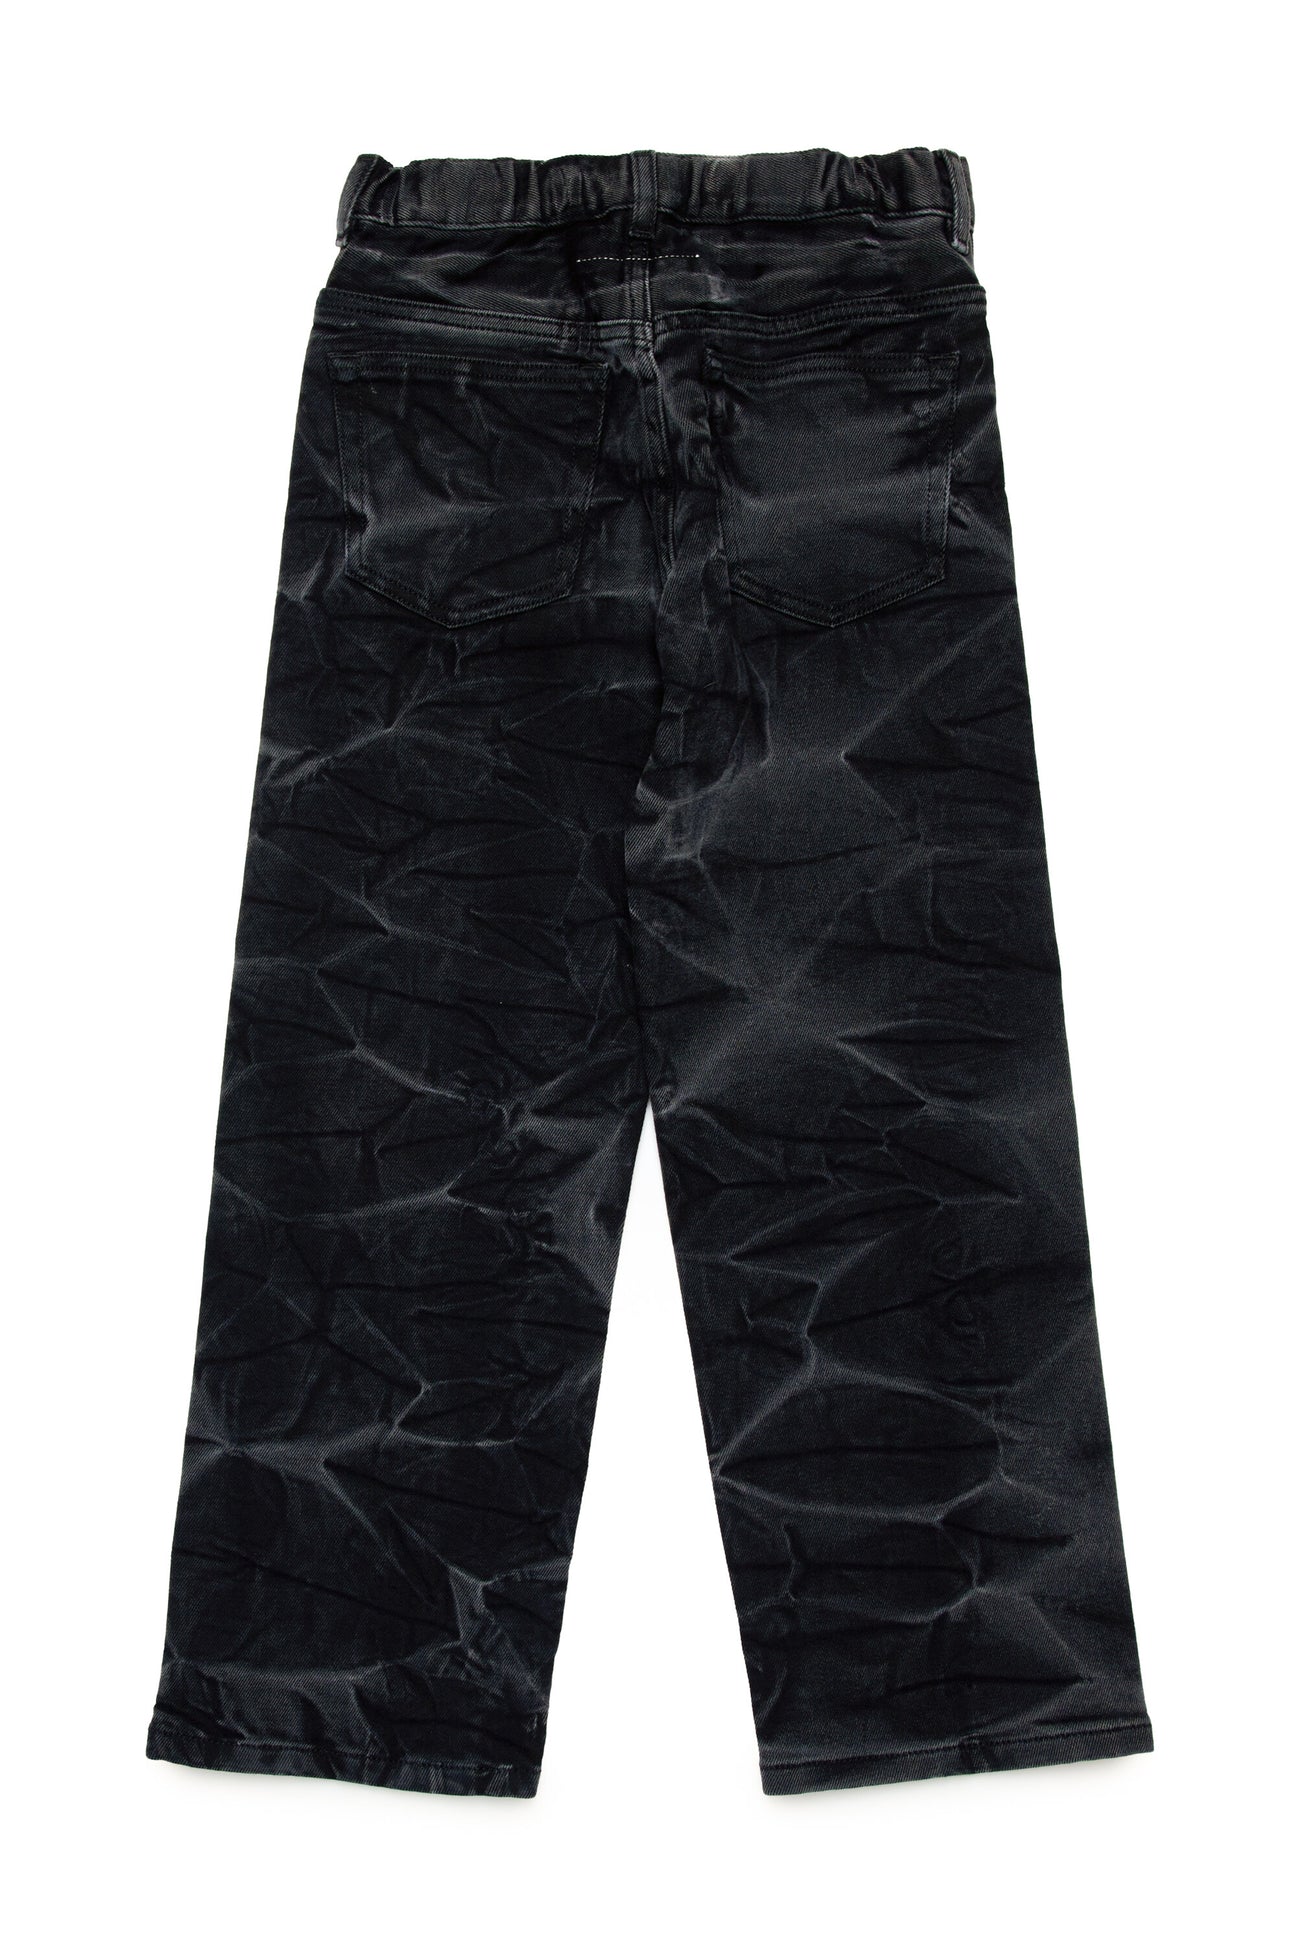 Black creased-effect jeans Black creased-effect jeans